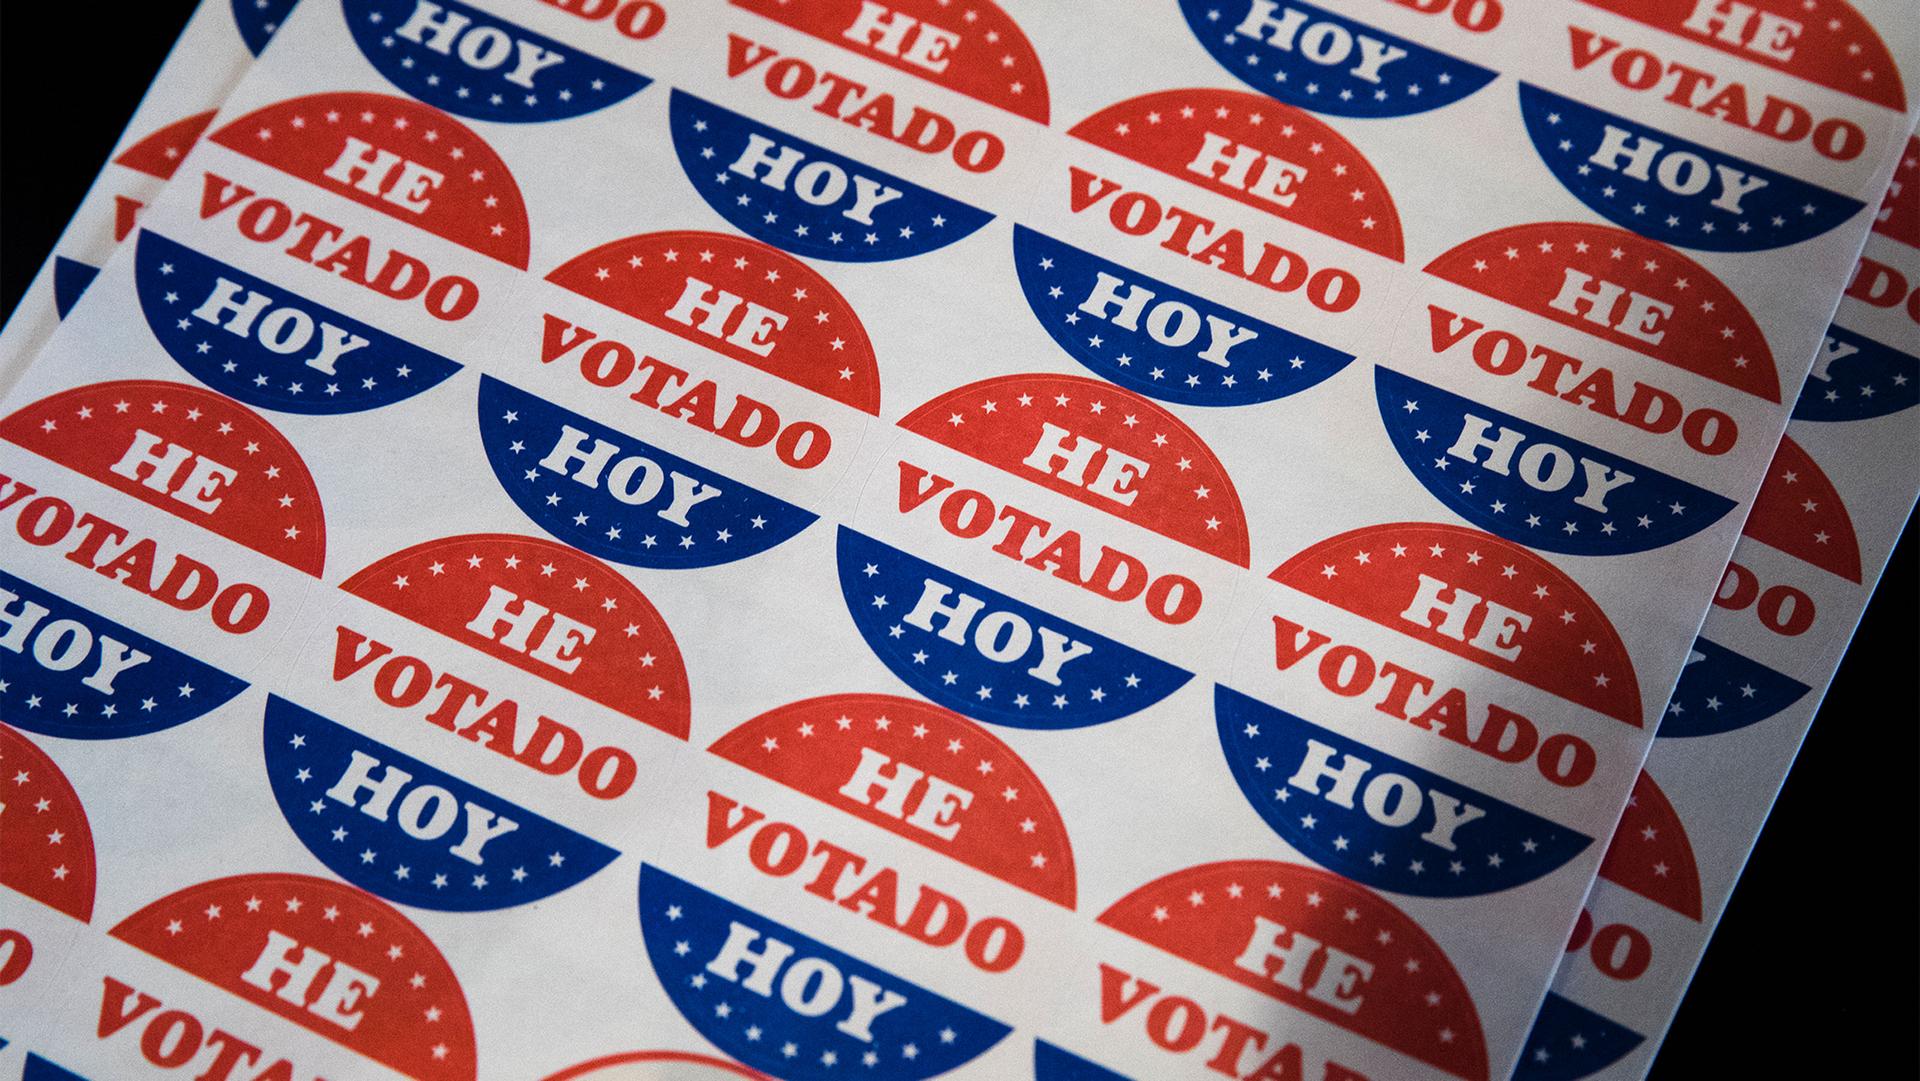 Shown in the Spanish language are "He Votado Hoy" stickers or "I voted today" at a polling place in Philadelphia.